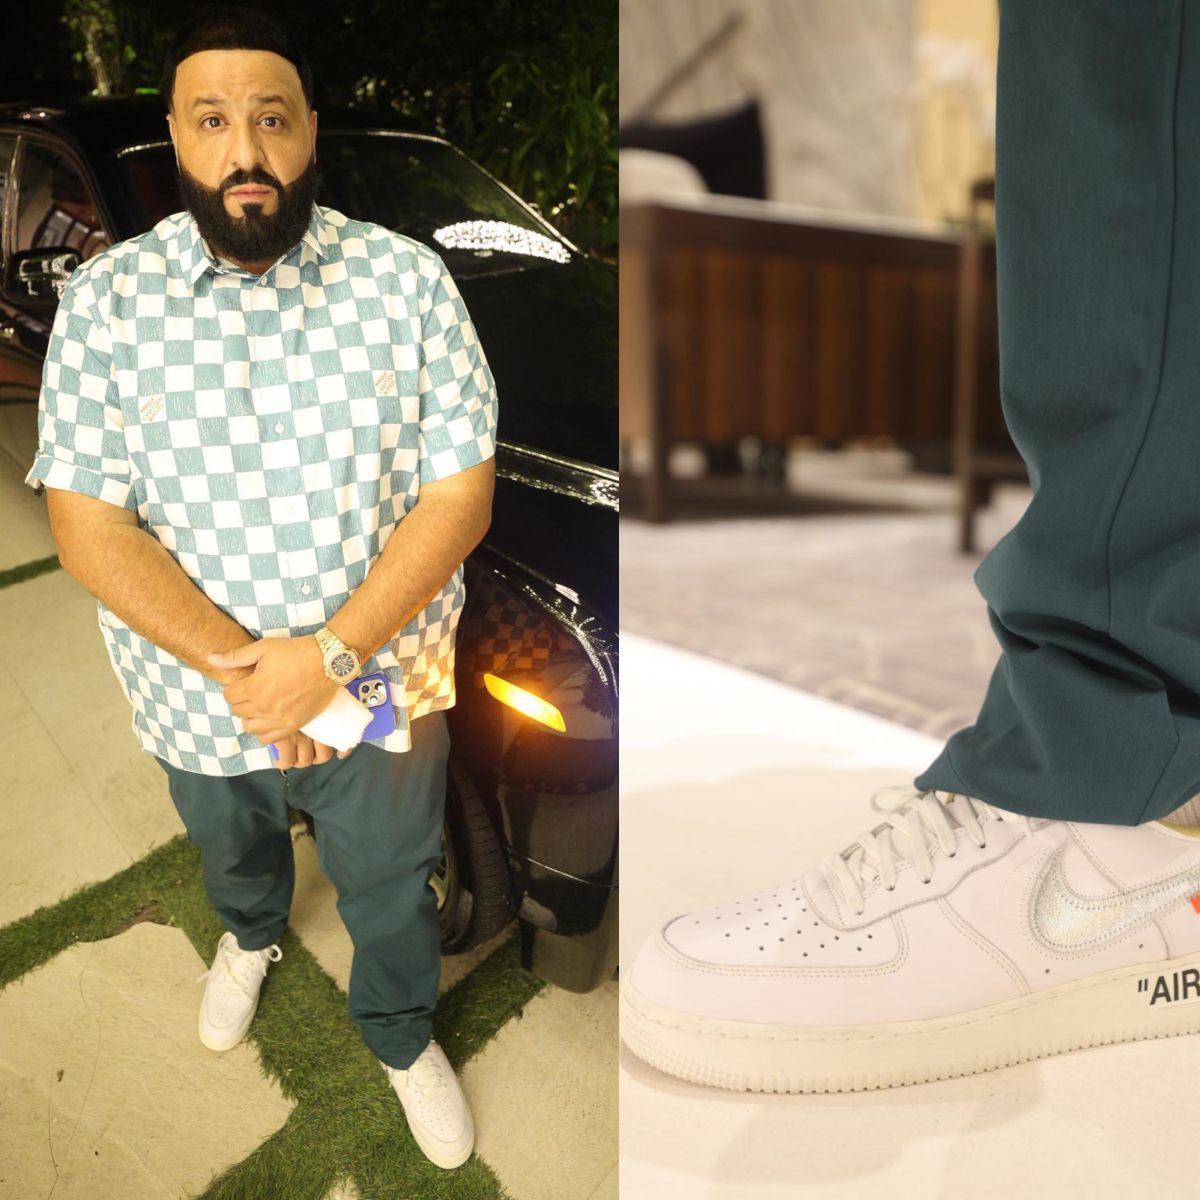 DJKhaled really brought a matching pillow for his LV AF1s 😂